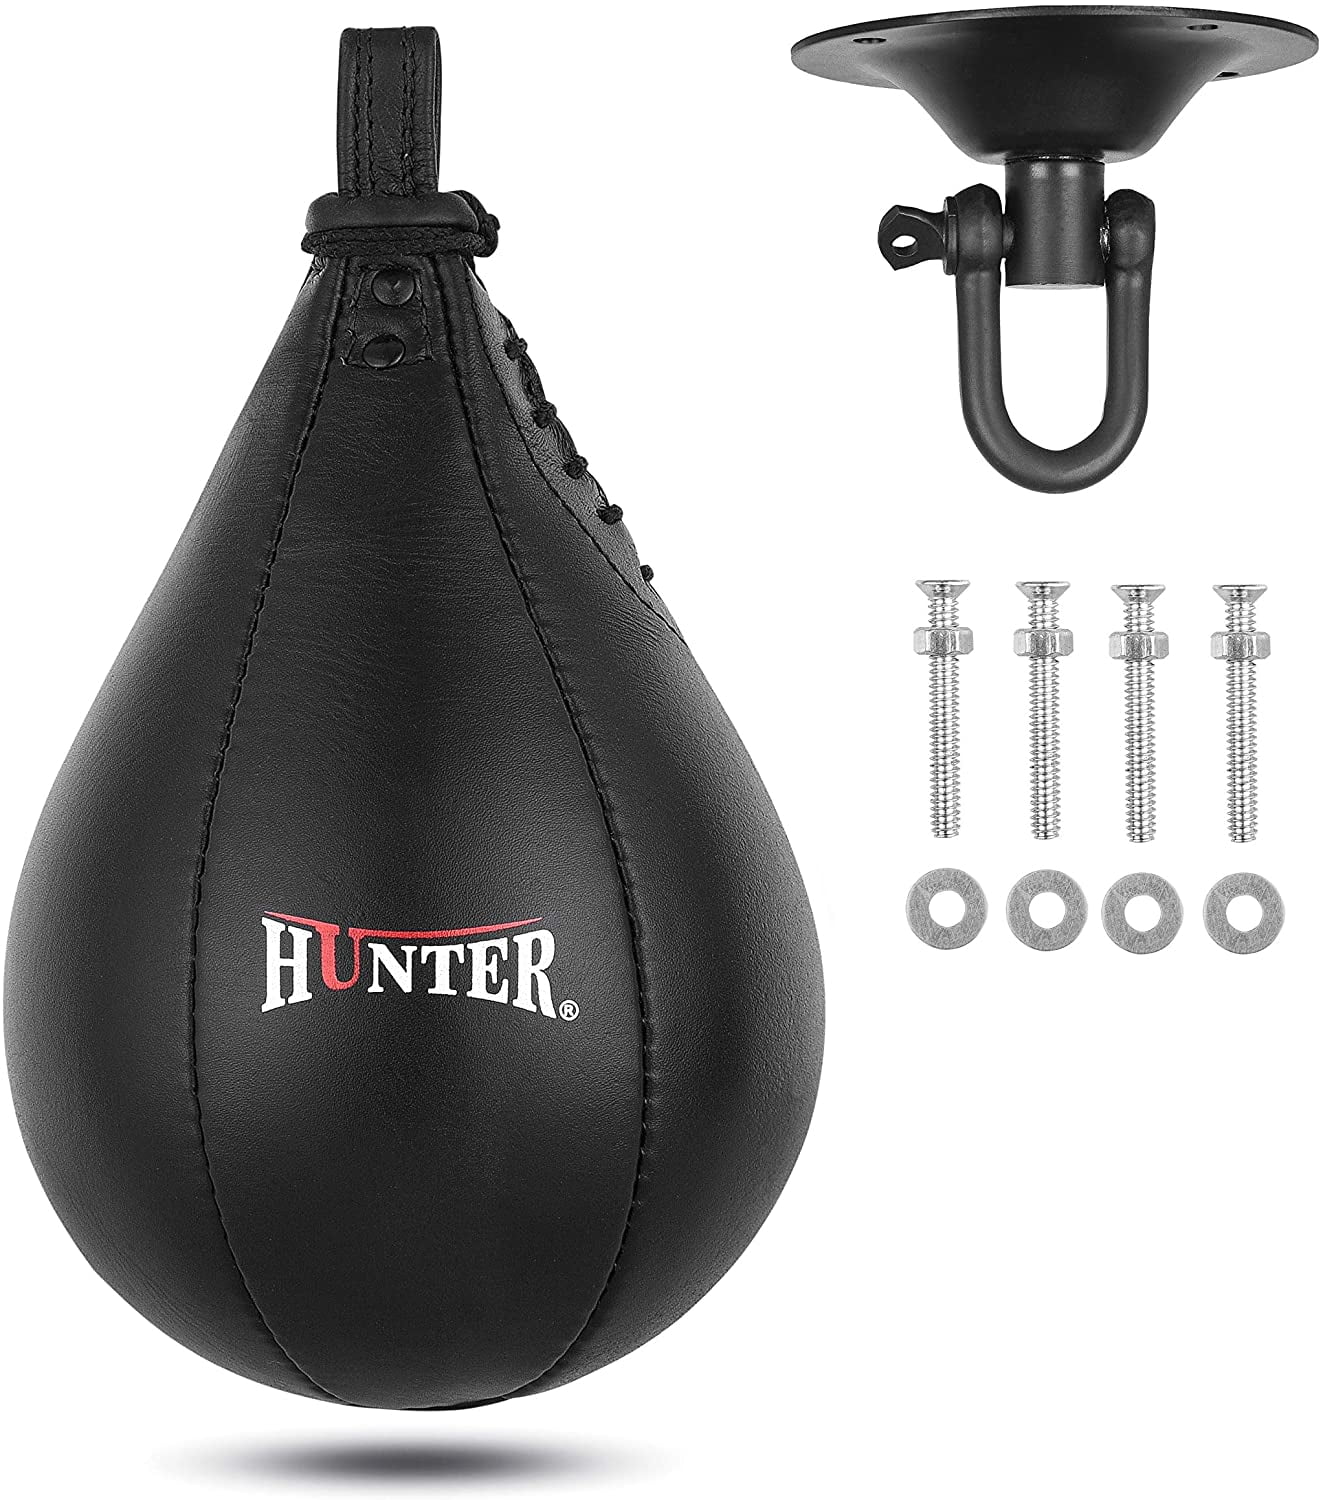 HUNTER Double End Speed Ball Bag Cowhide Leather Boxing Floor to Ceiling Rope MMA Training Muay Thai Punching Dodge Striking...